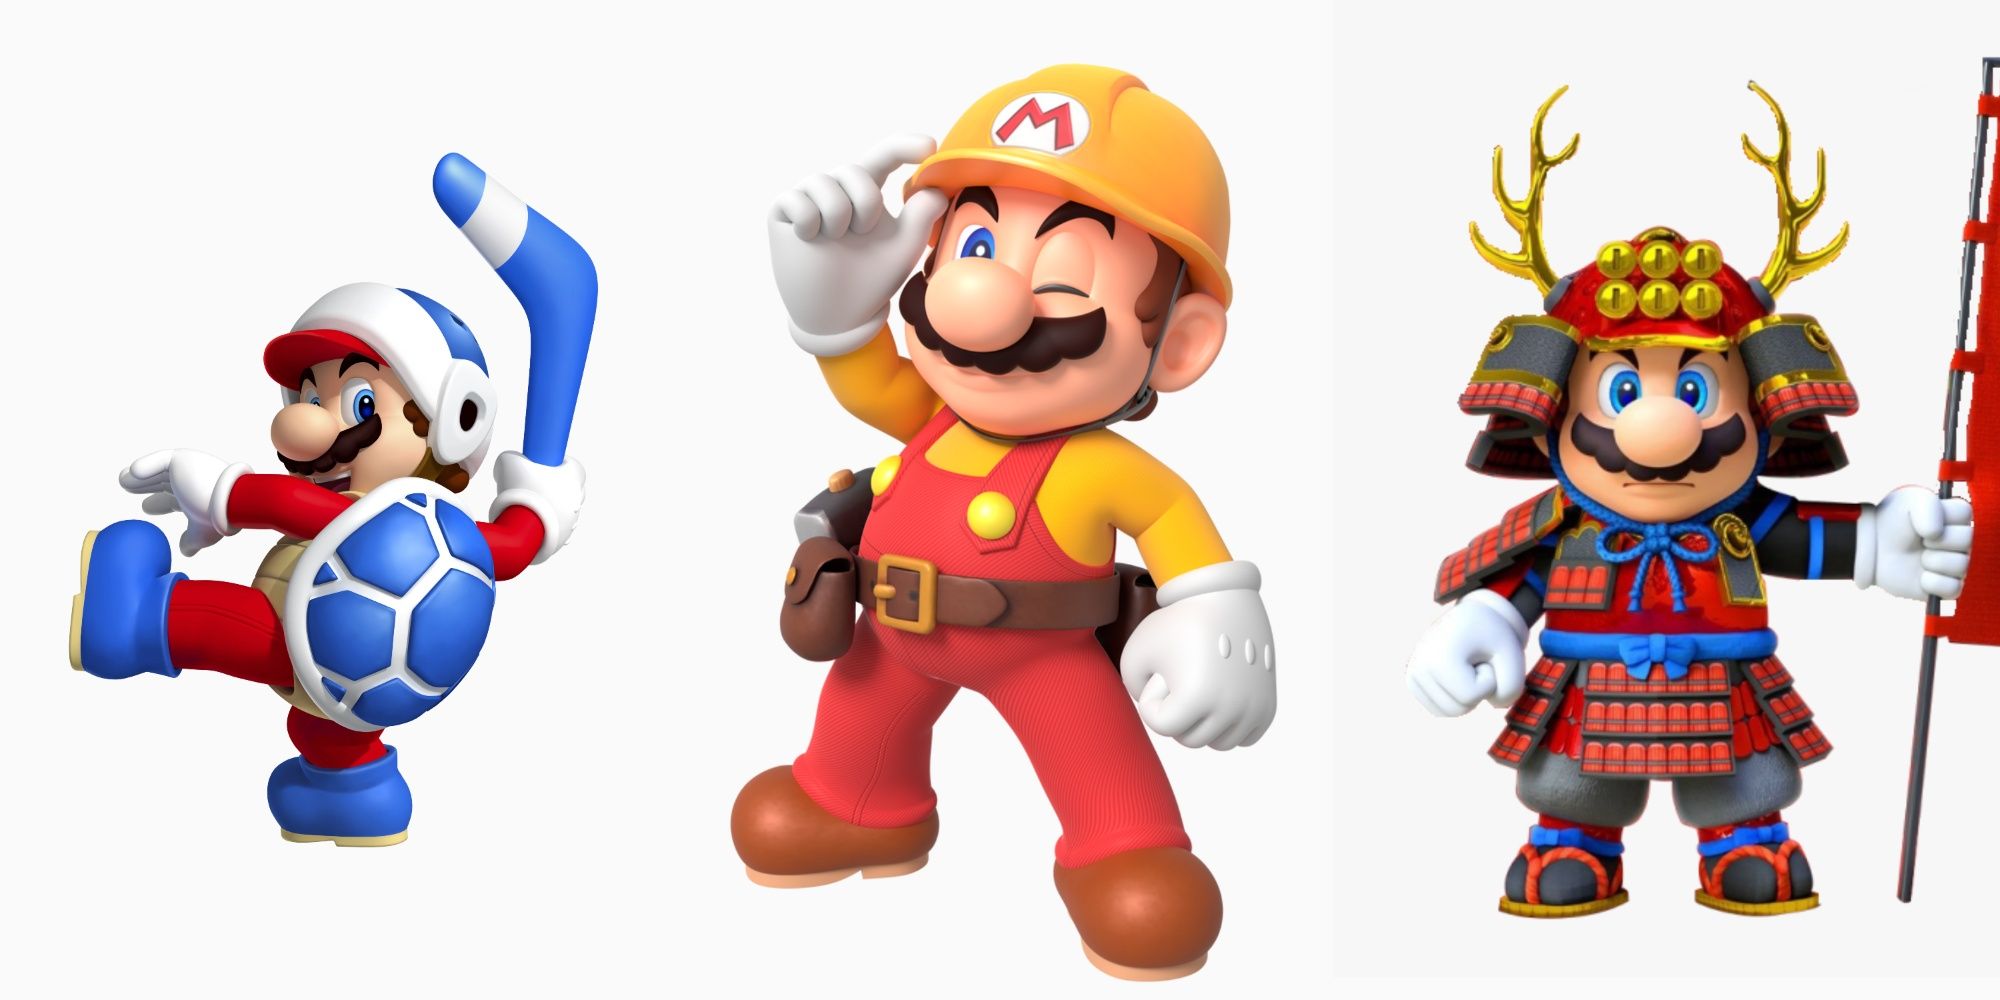 Mario's Best Outfits In The Series